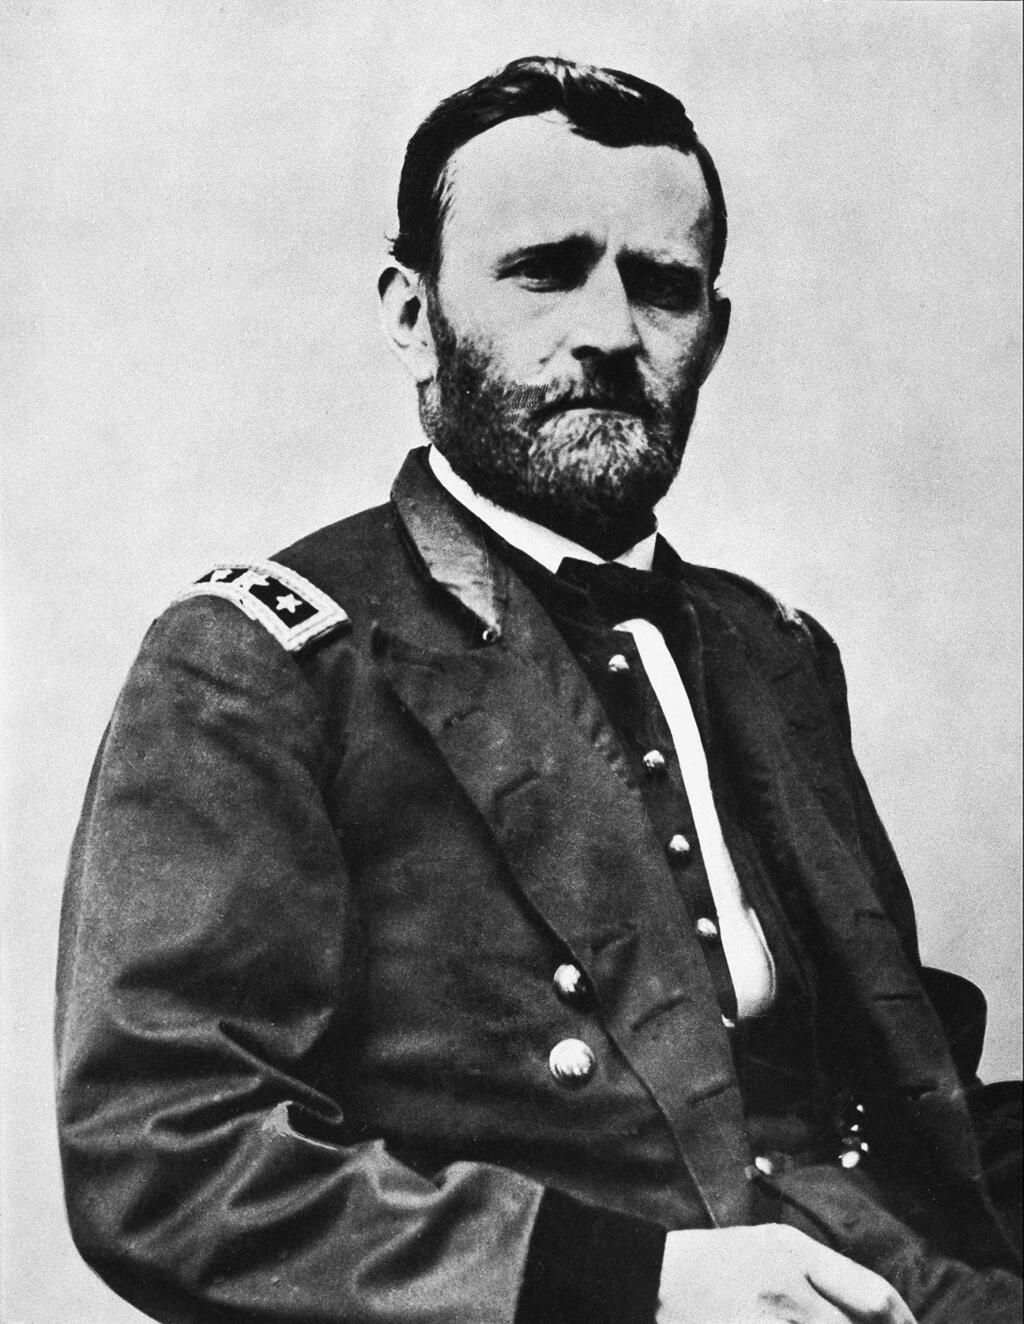 Ulysses S. Grant was president at a difficult time in American history. (MATTHEW BRADY / Associated Press, 1864)